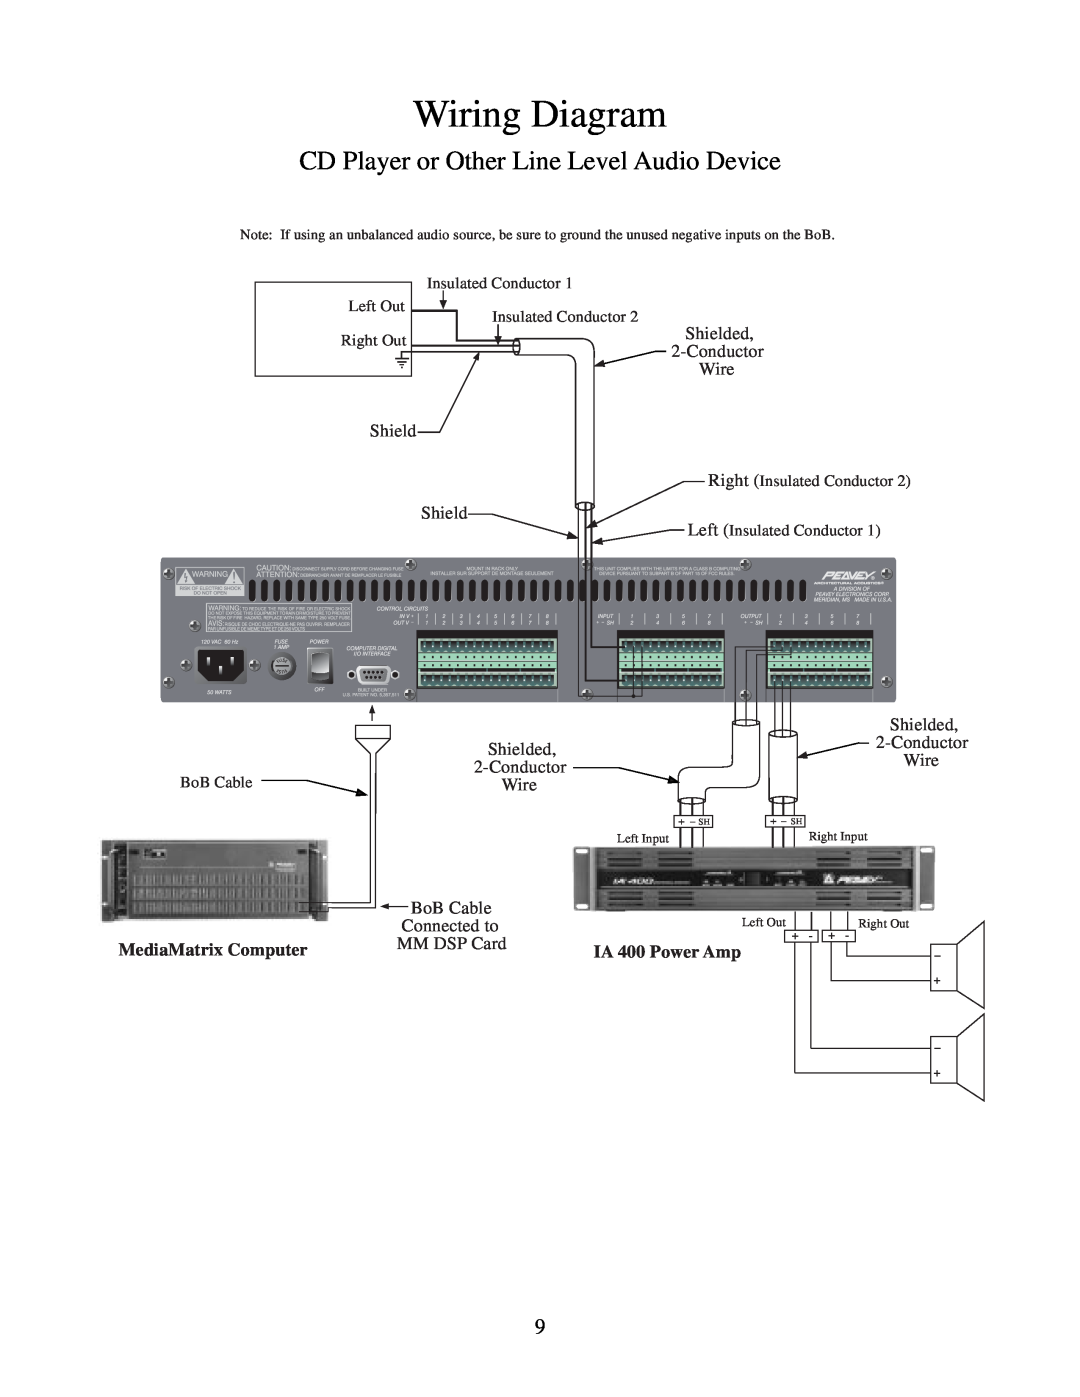 Peavey 646-049 Wiring Diagram, CD Player or Other Line Level Audio Device, IA 400 Power Amp, MediaMatrix Computer, + -Sh 